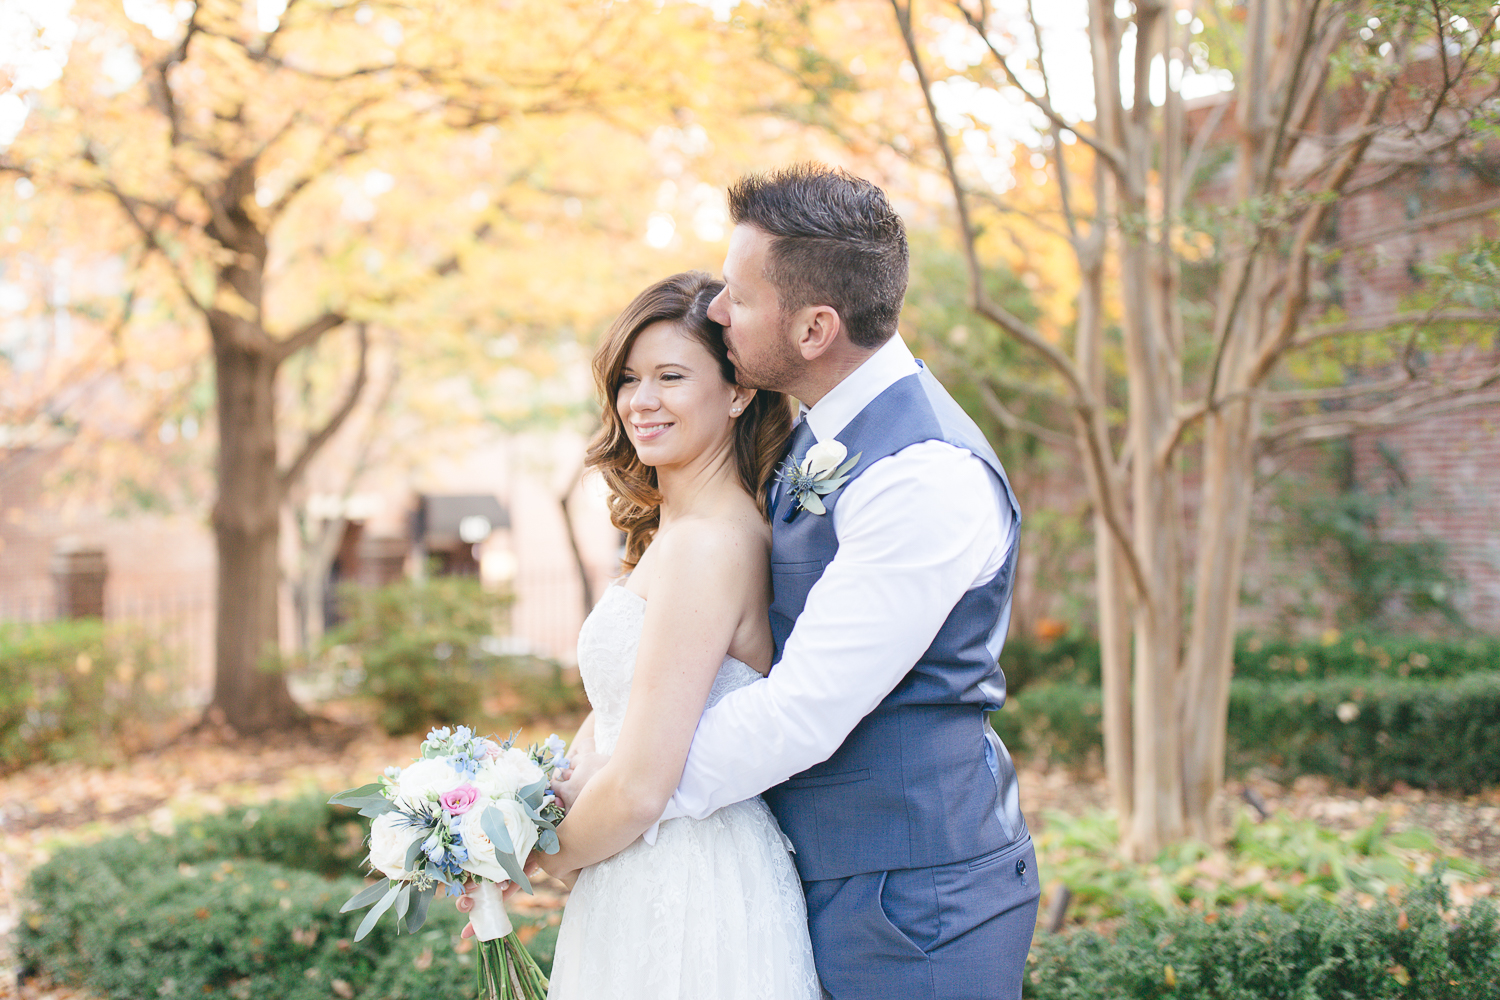 Carlyle House Elopement | Maral Noori Photography | Virginia Wedding PhotographerCarlyle House Elopement | Maral Noori Photography | Virginia Wedding Photographer